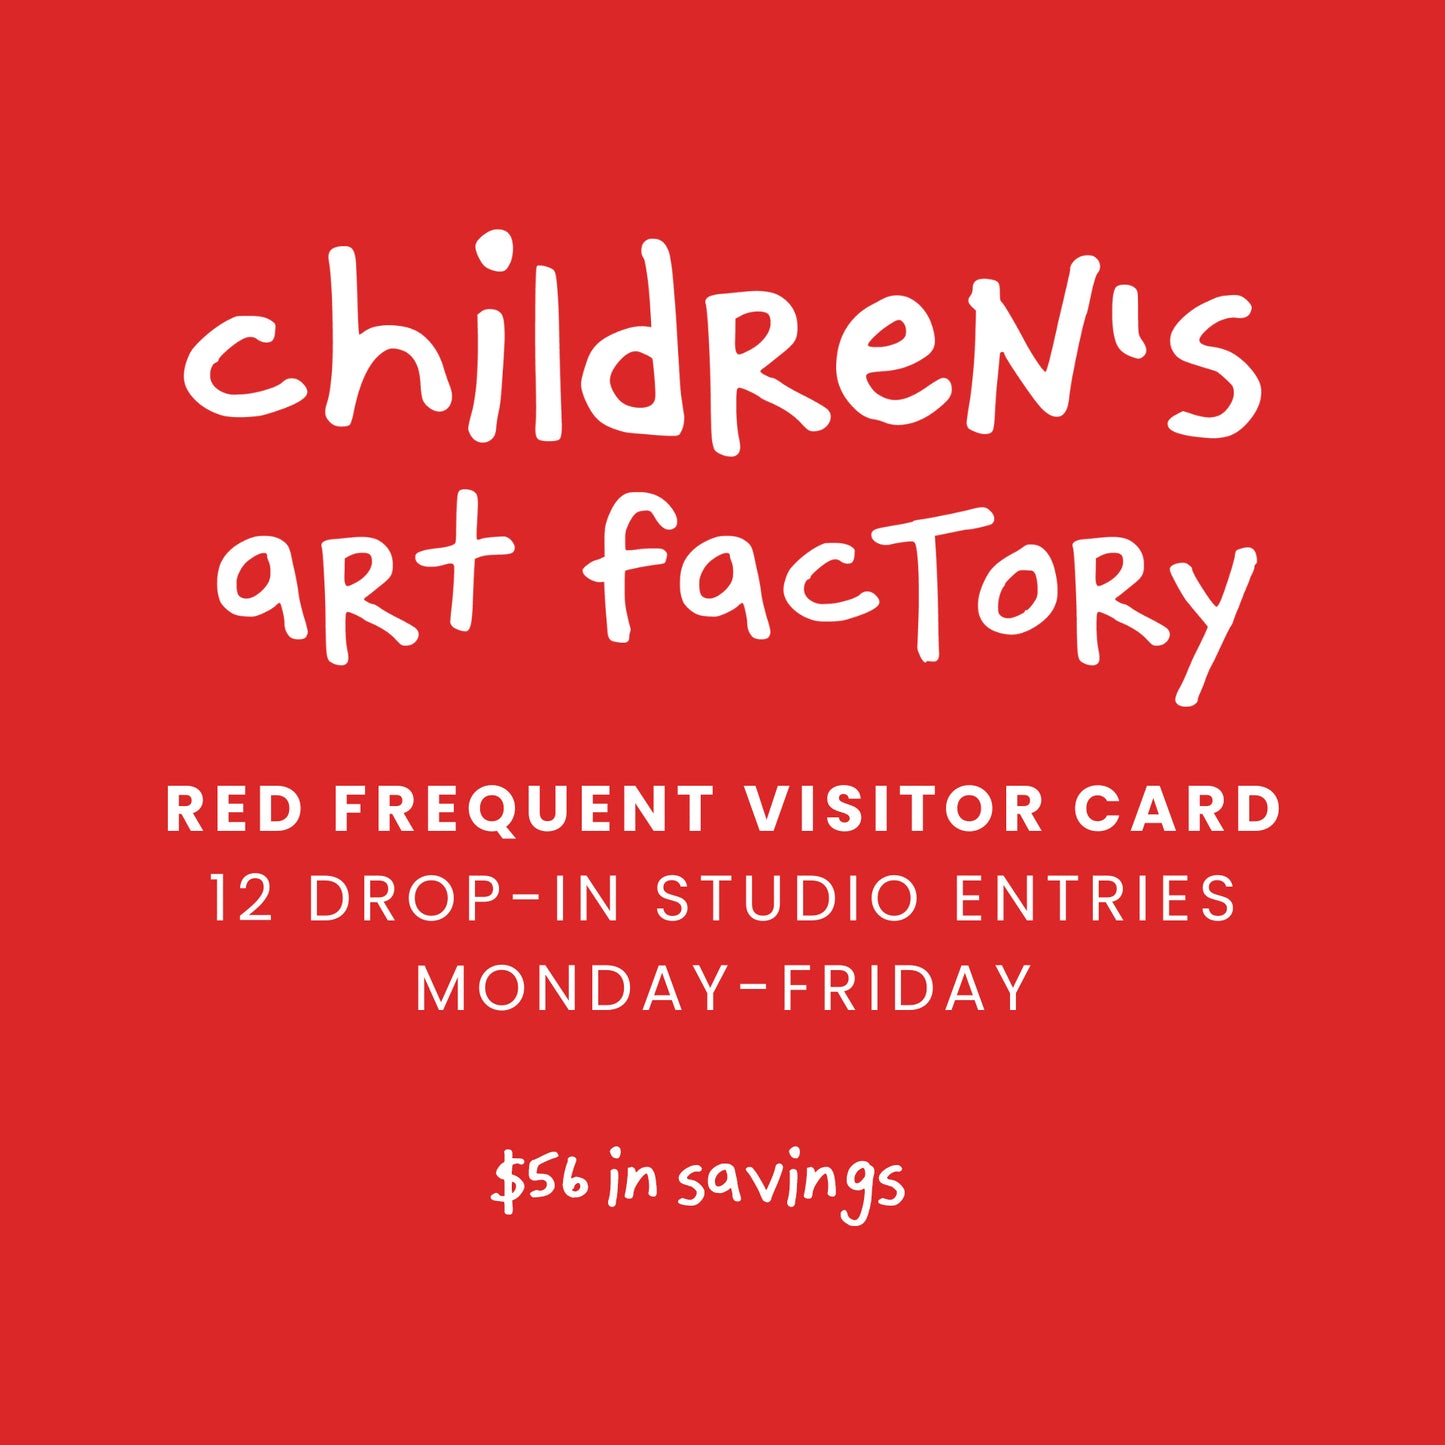 Red Frequent Visitor Card: 12 Open Studio Entries Monday-Friday. $56+ in savings.